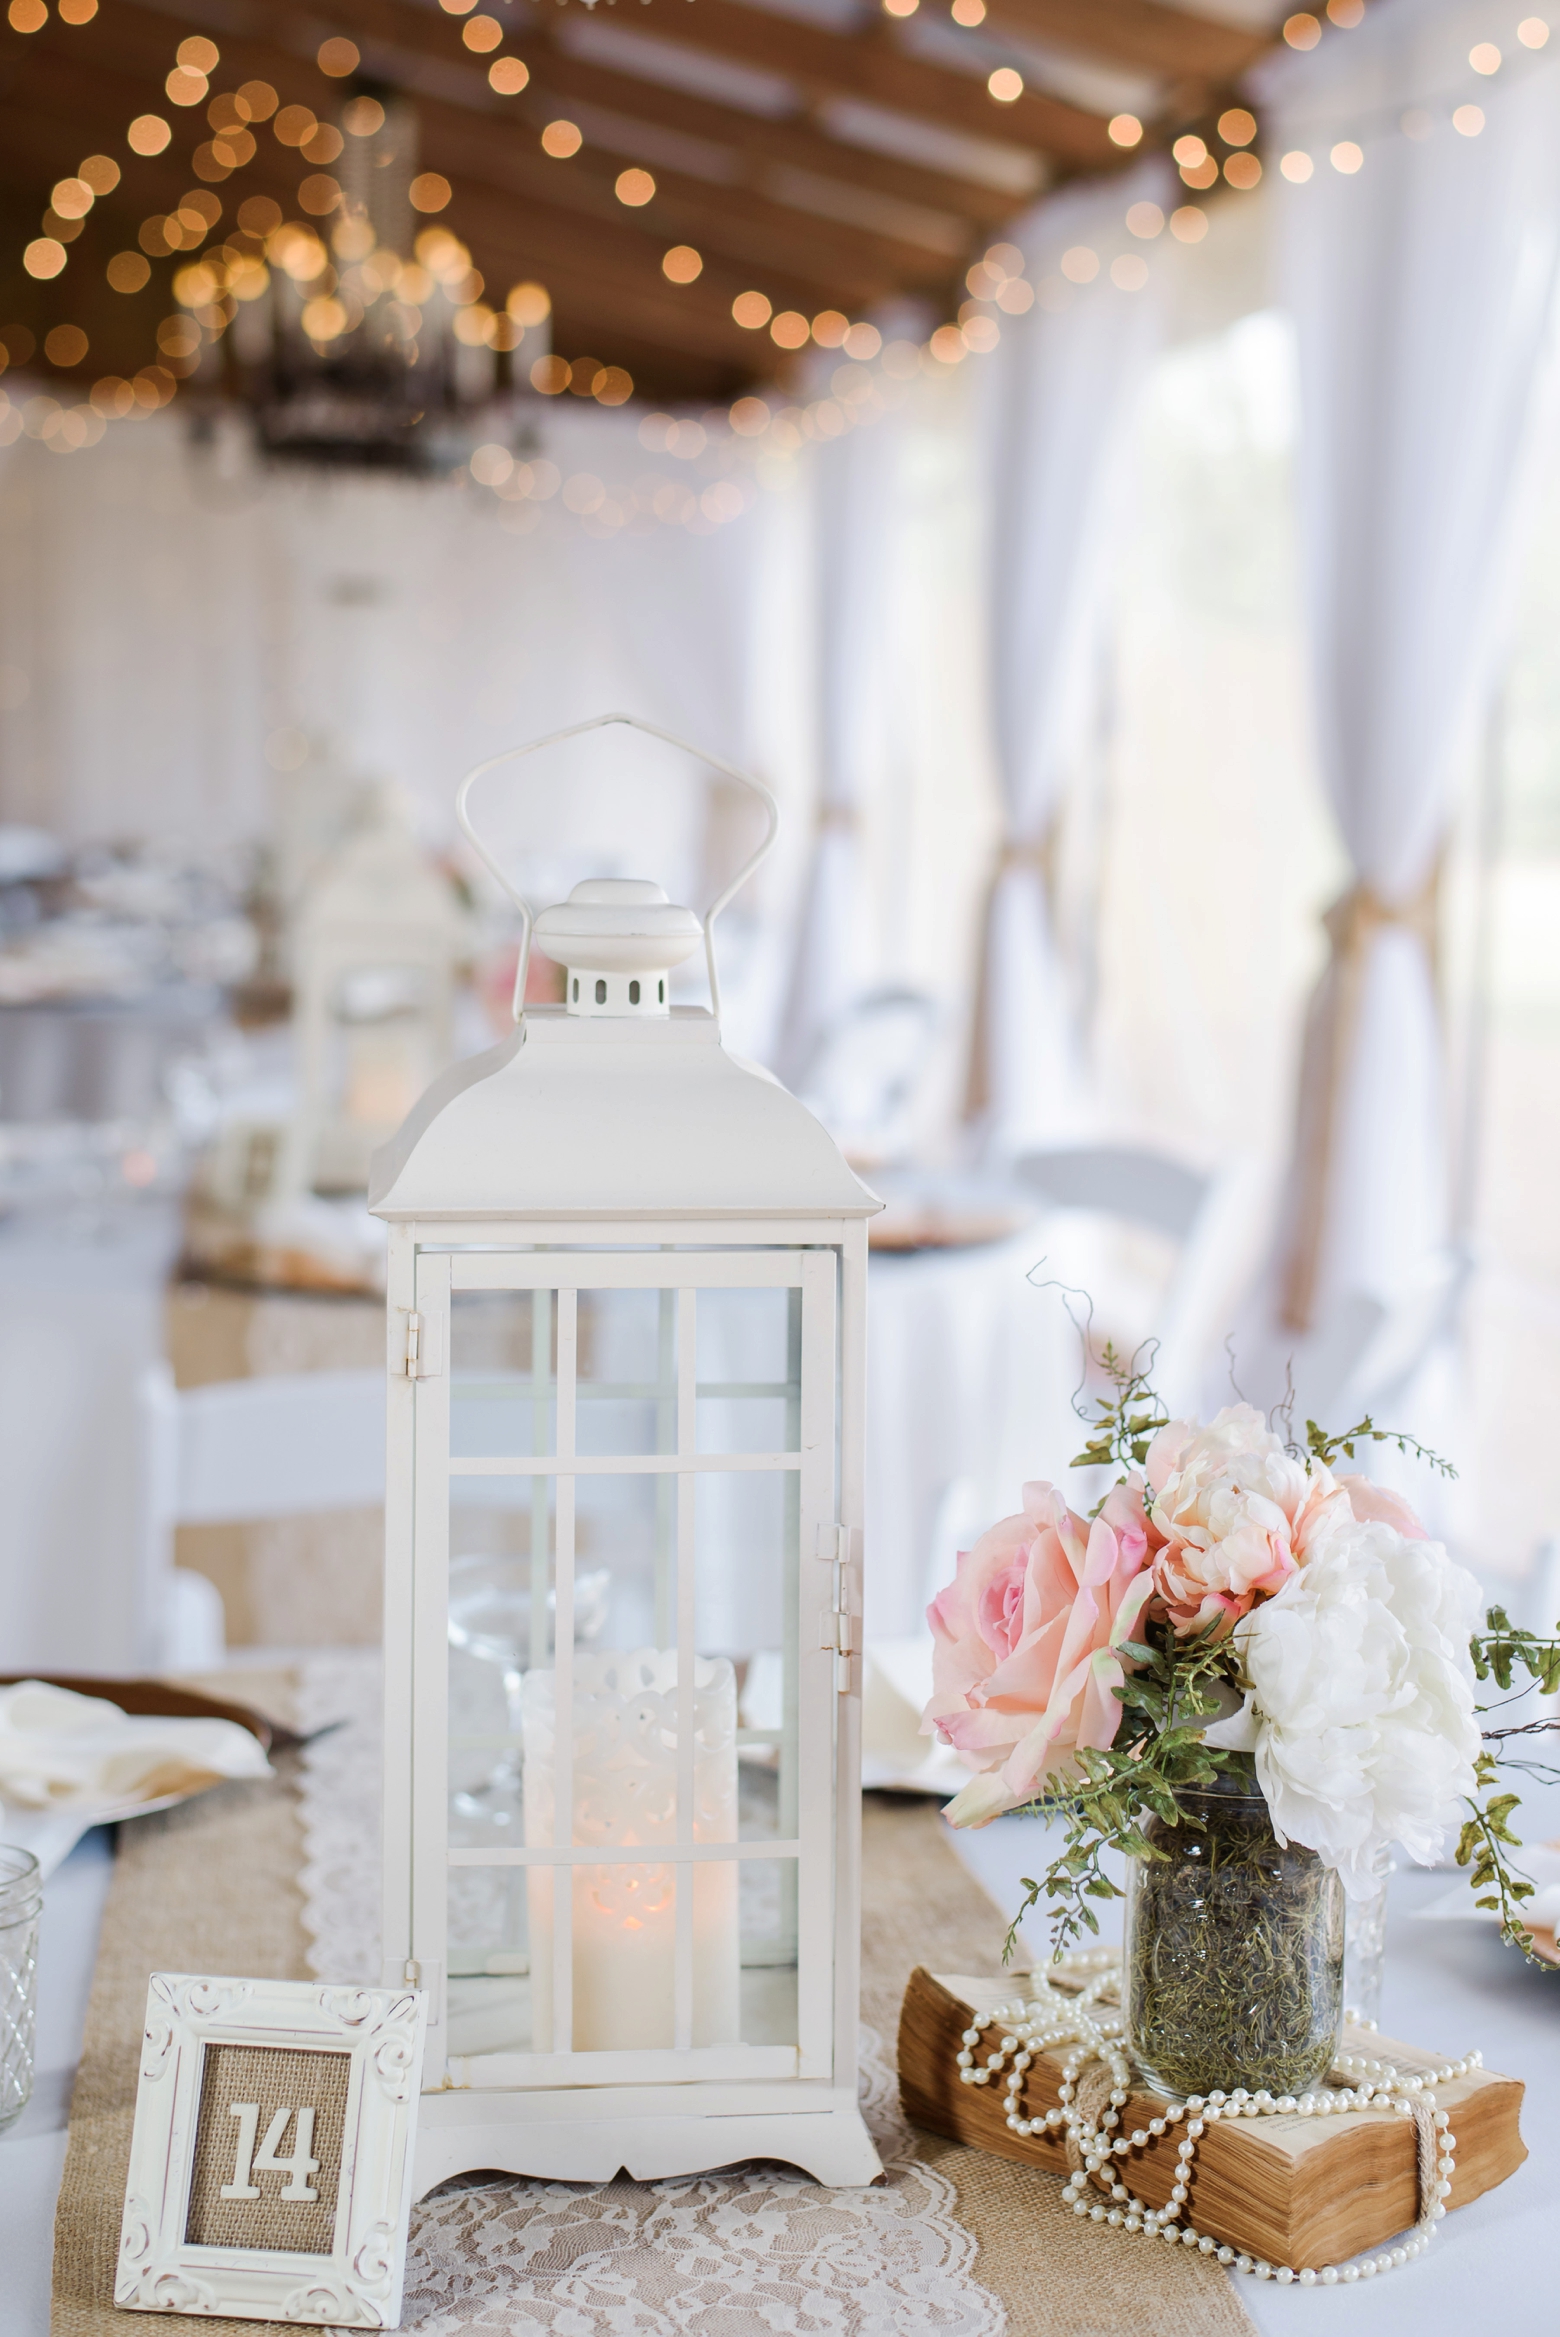 Table numbers and centerpieces filled with old books and pink and white roses